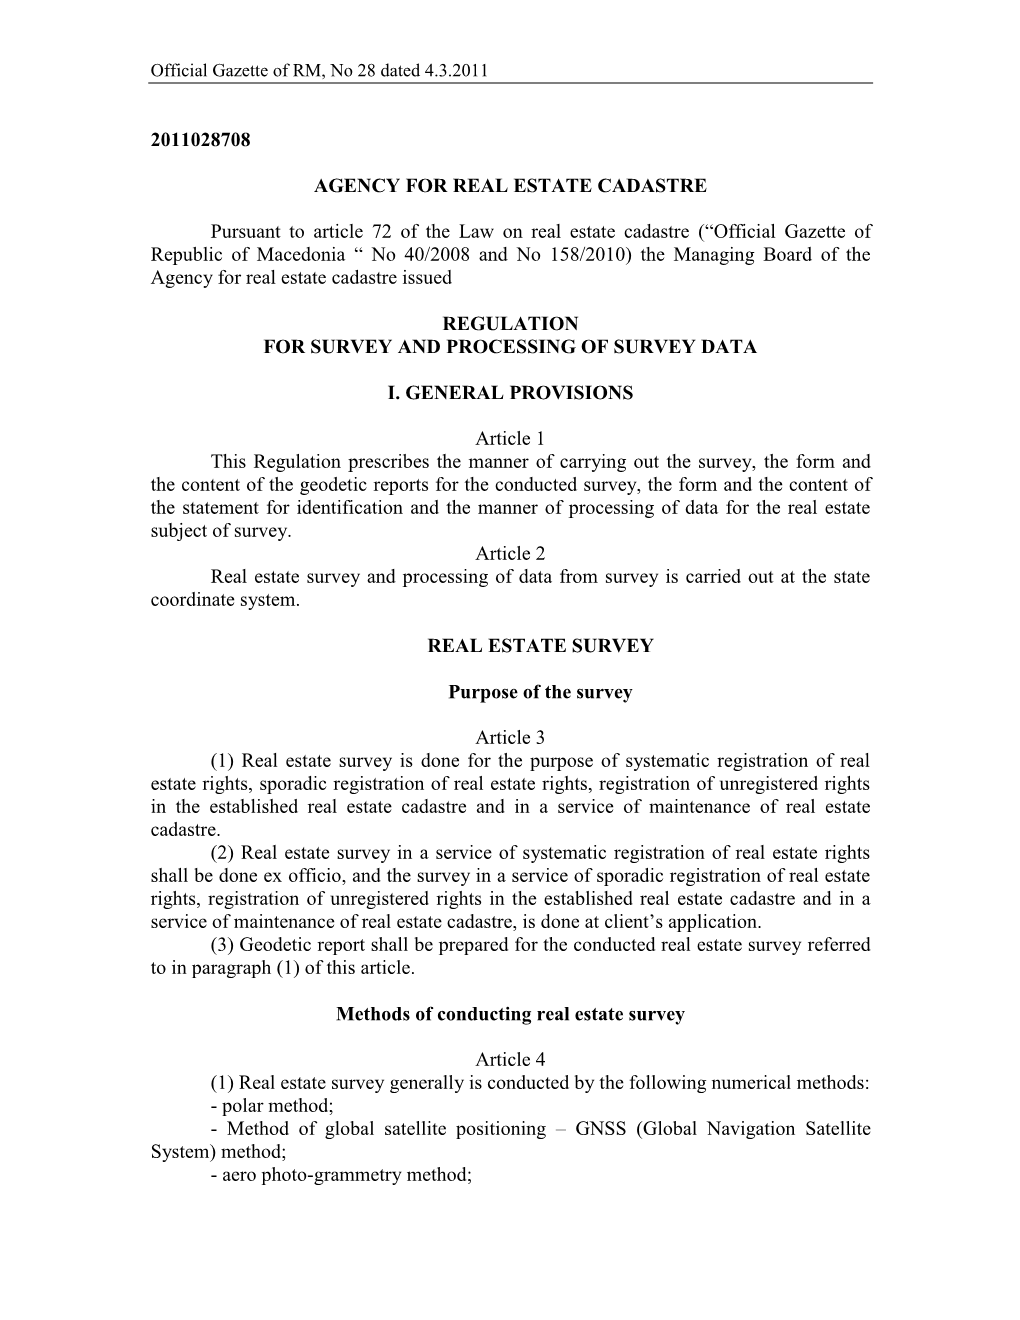 Official Gazette of RM, No 28 Dated 4.3.2011